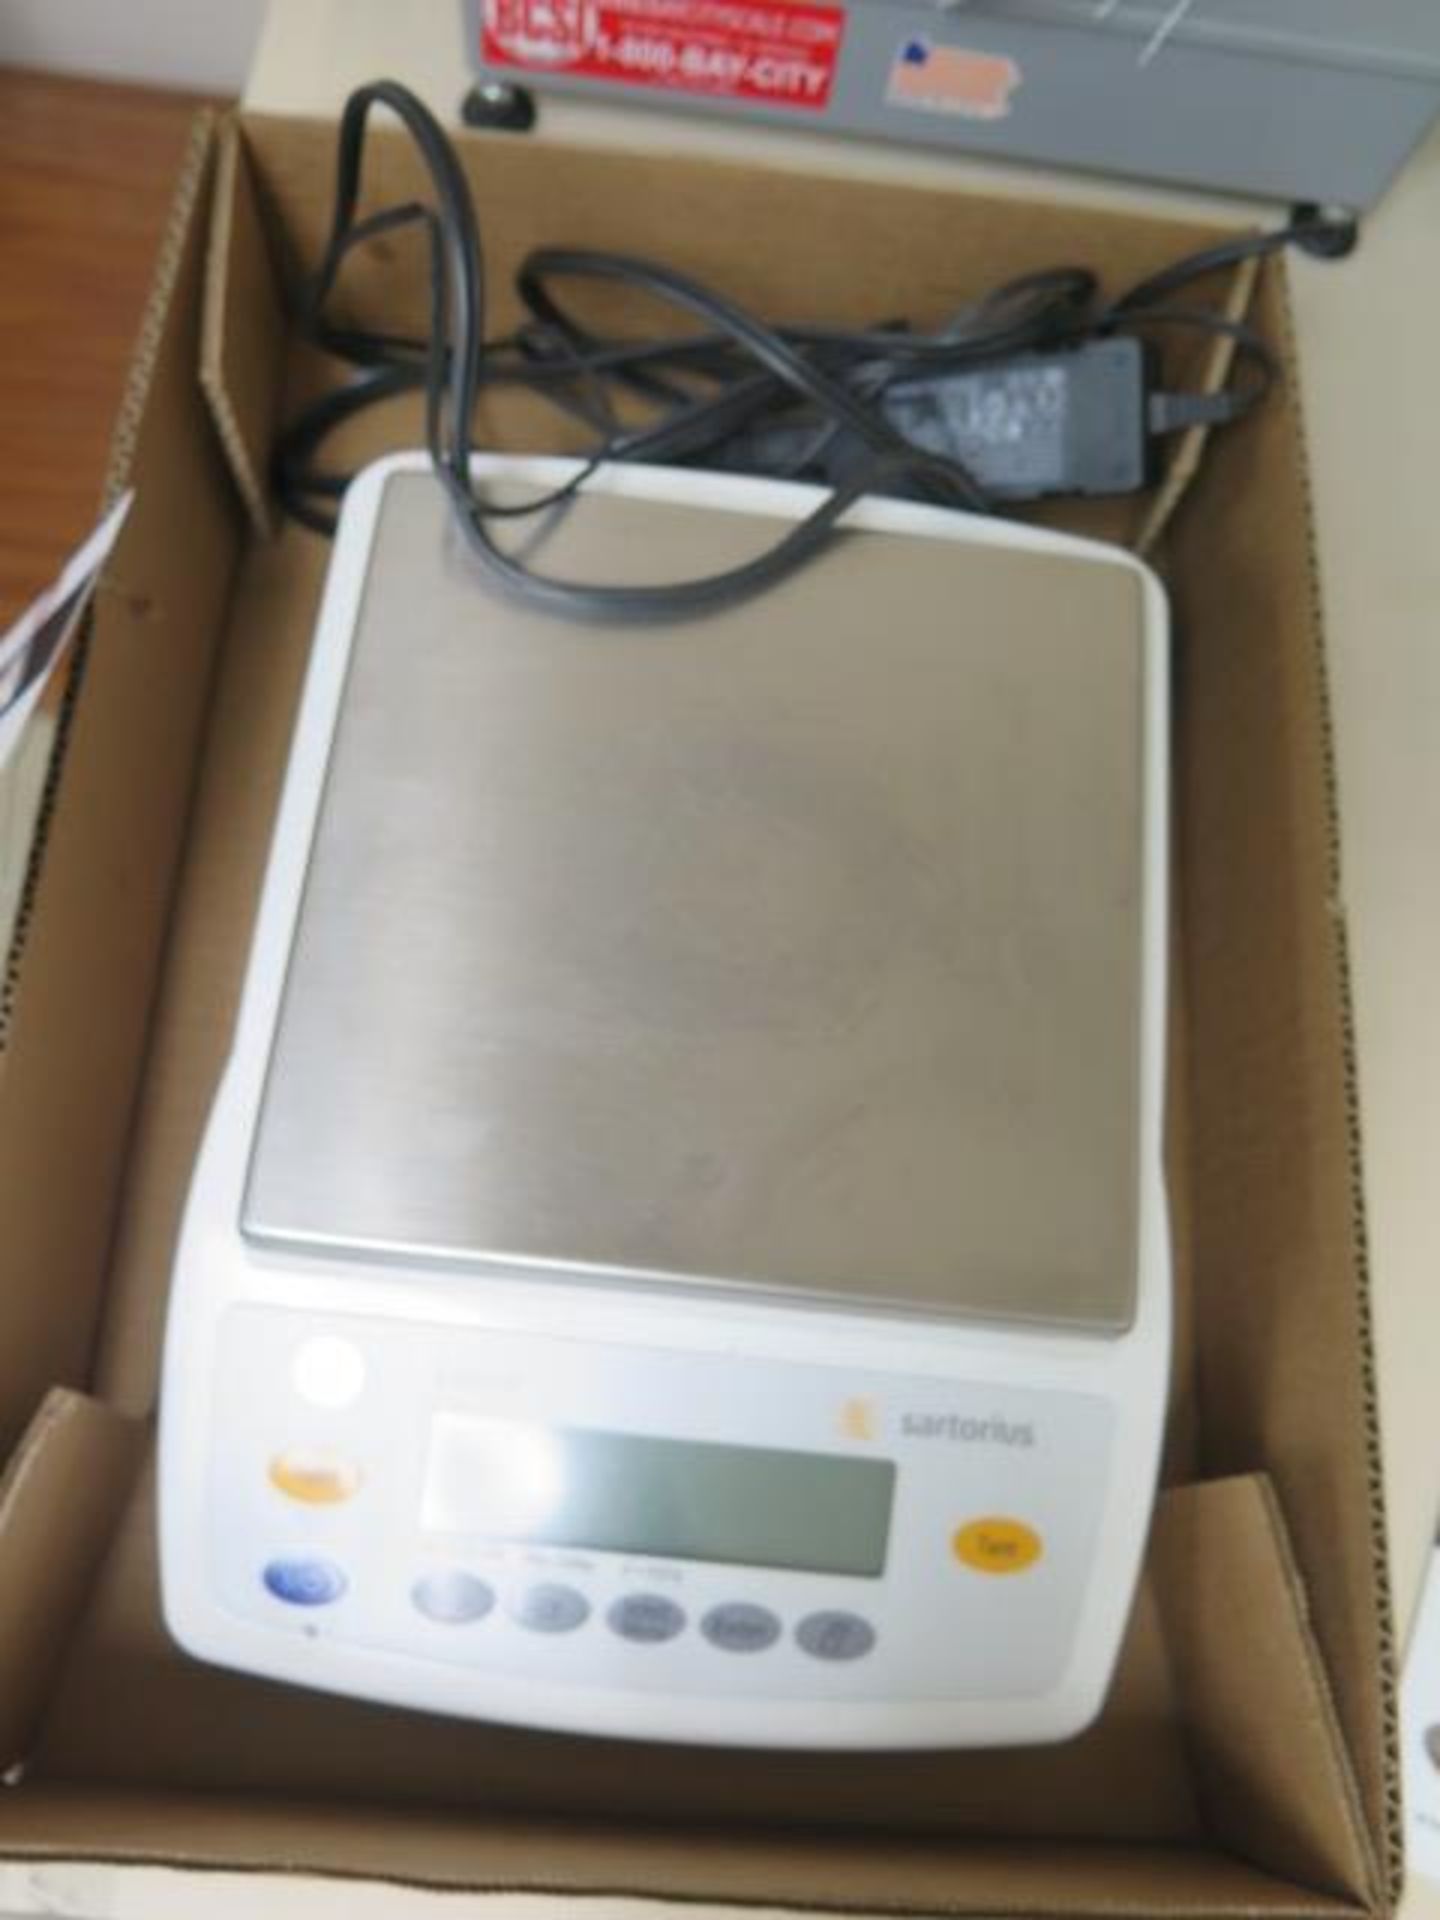 Satorius Digital Counting Scale (SOLD AS-IS - NO WARRANTY) - Image 2 of 3